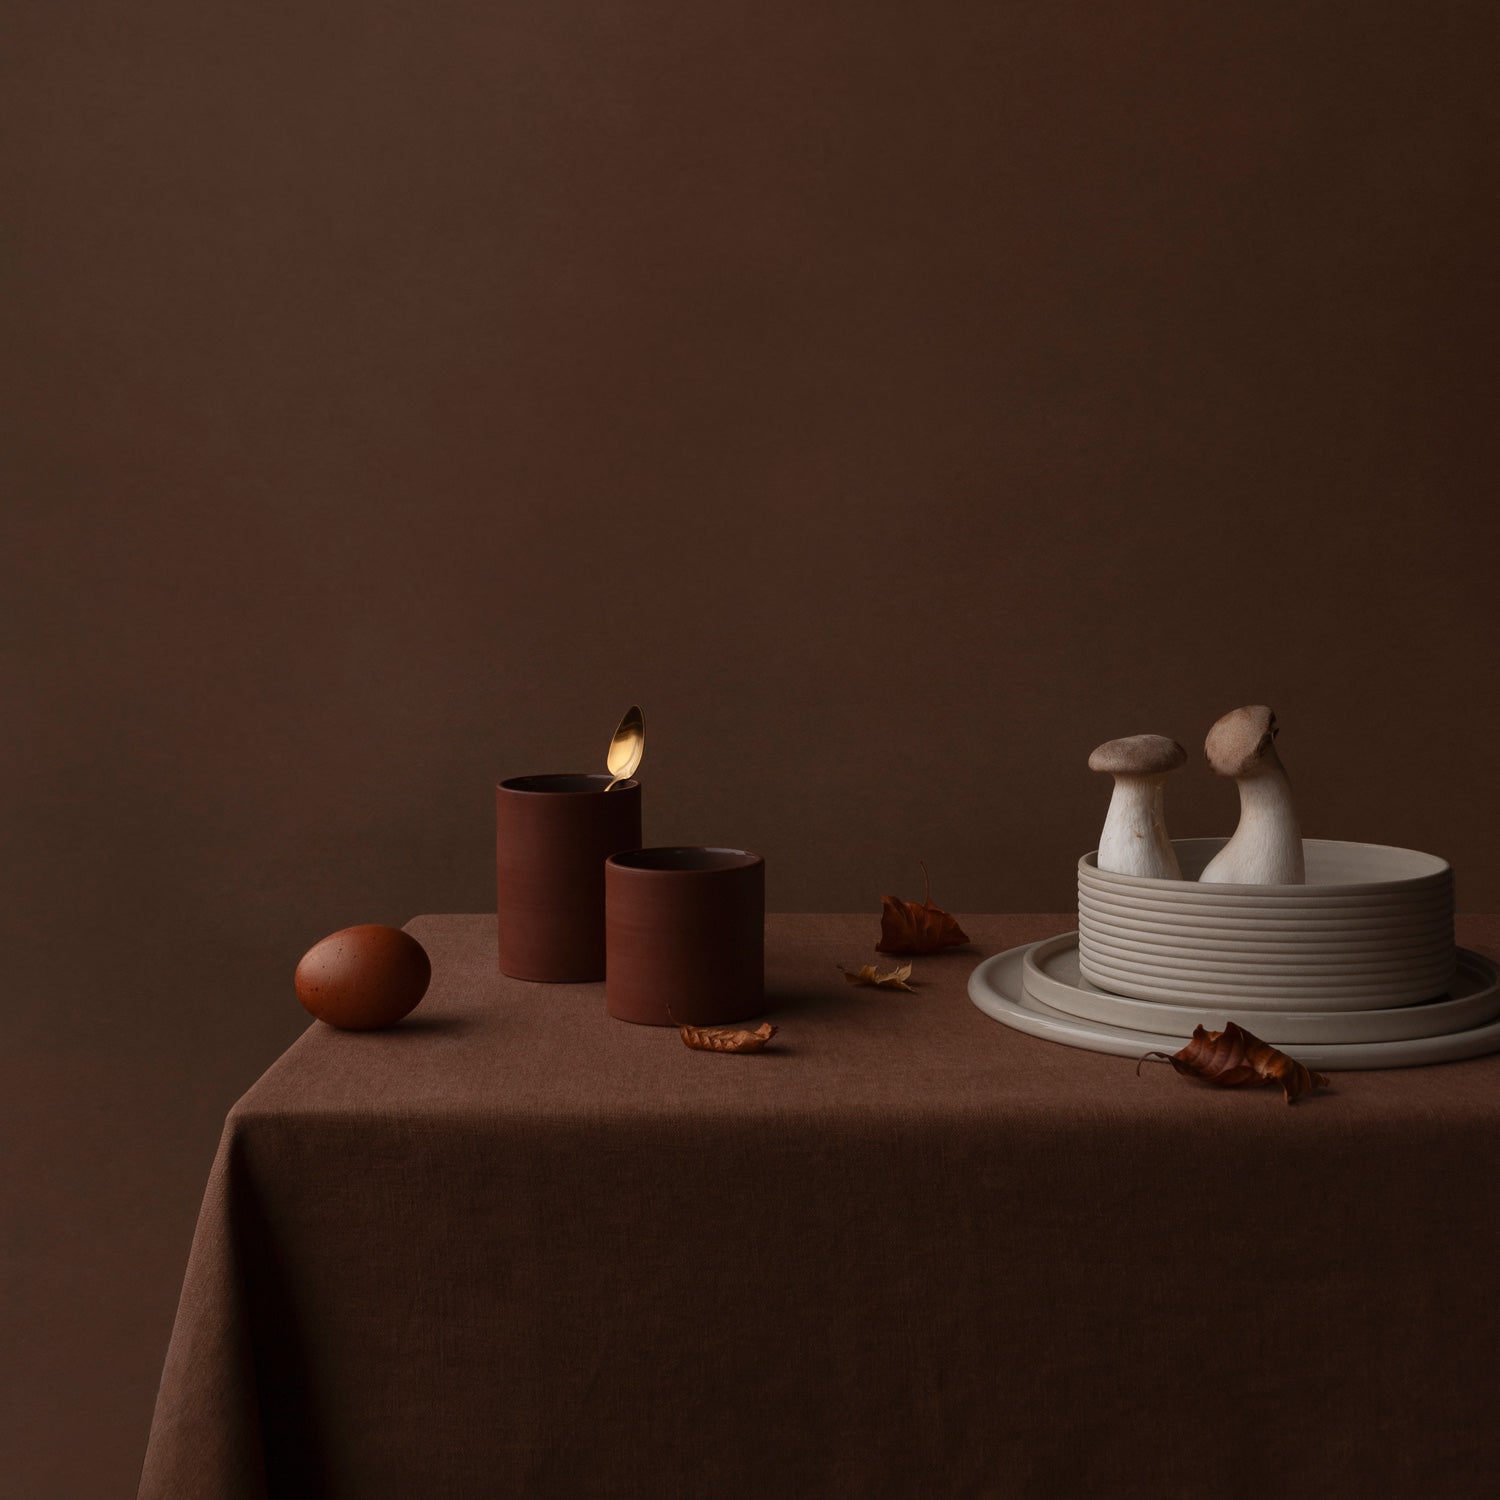 NEW: Tea Cup AGATA red/brown claybody